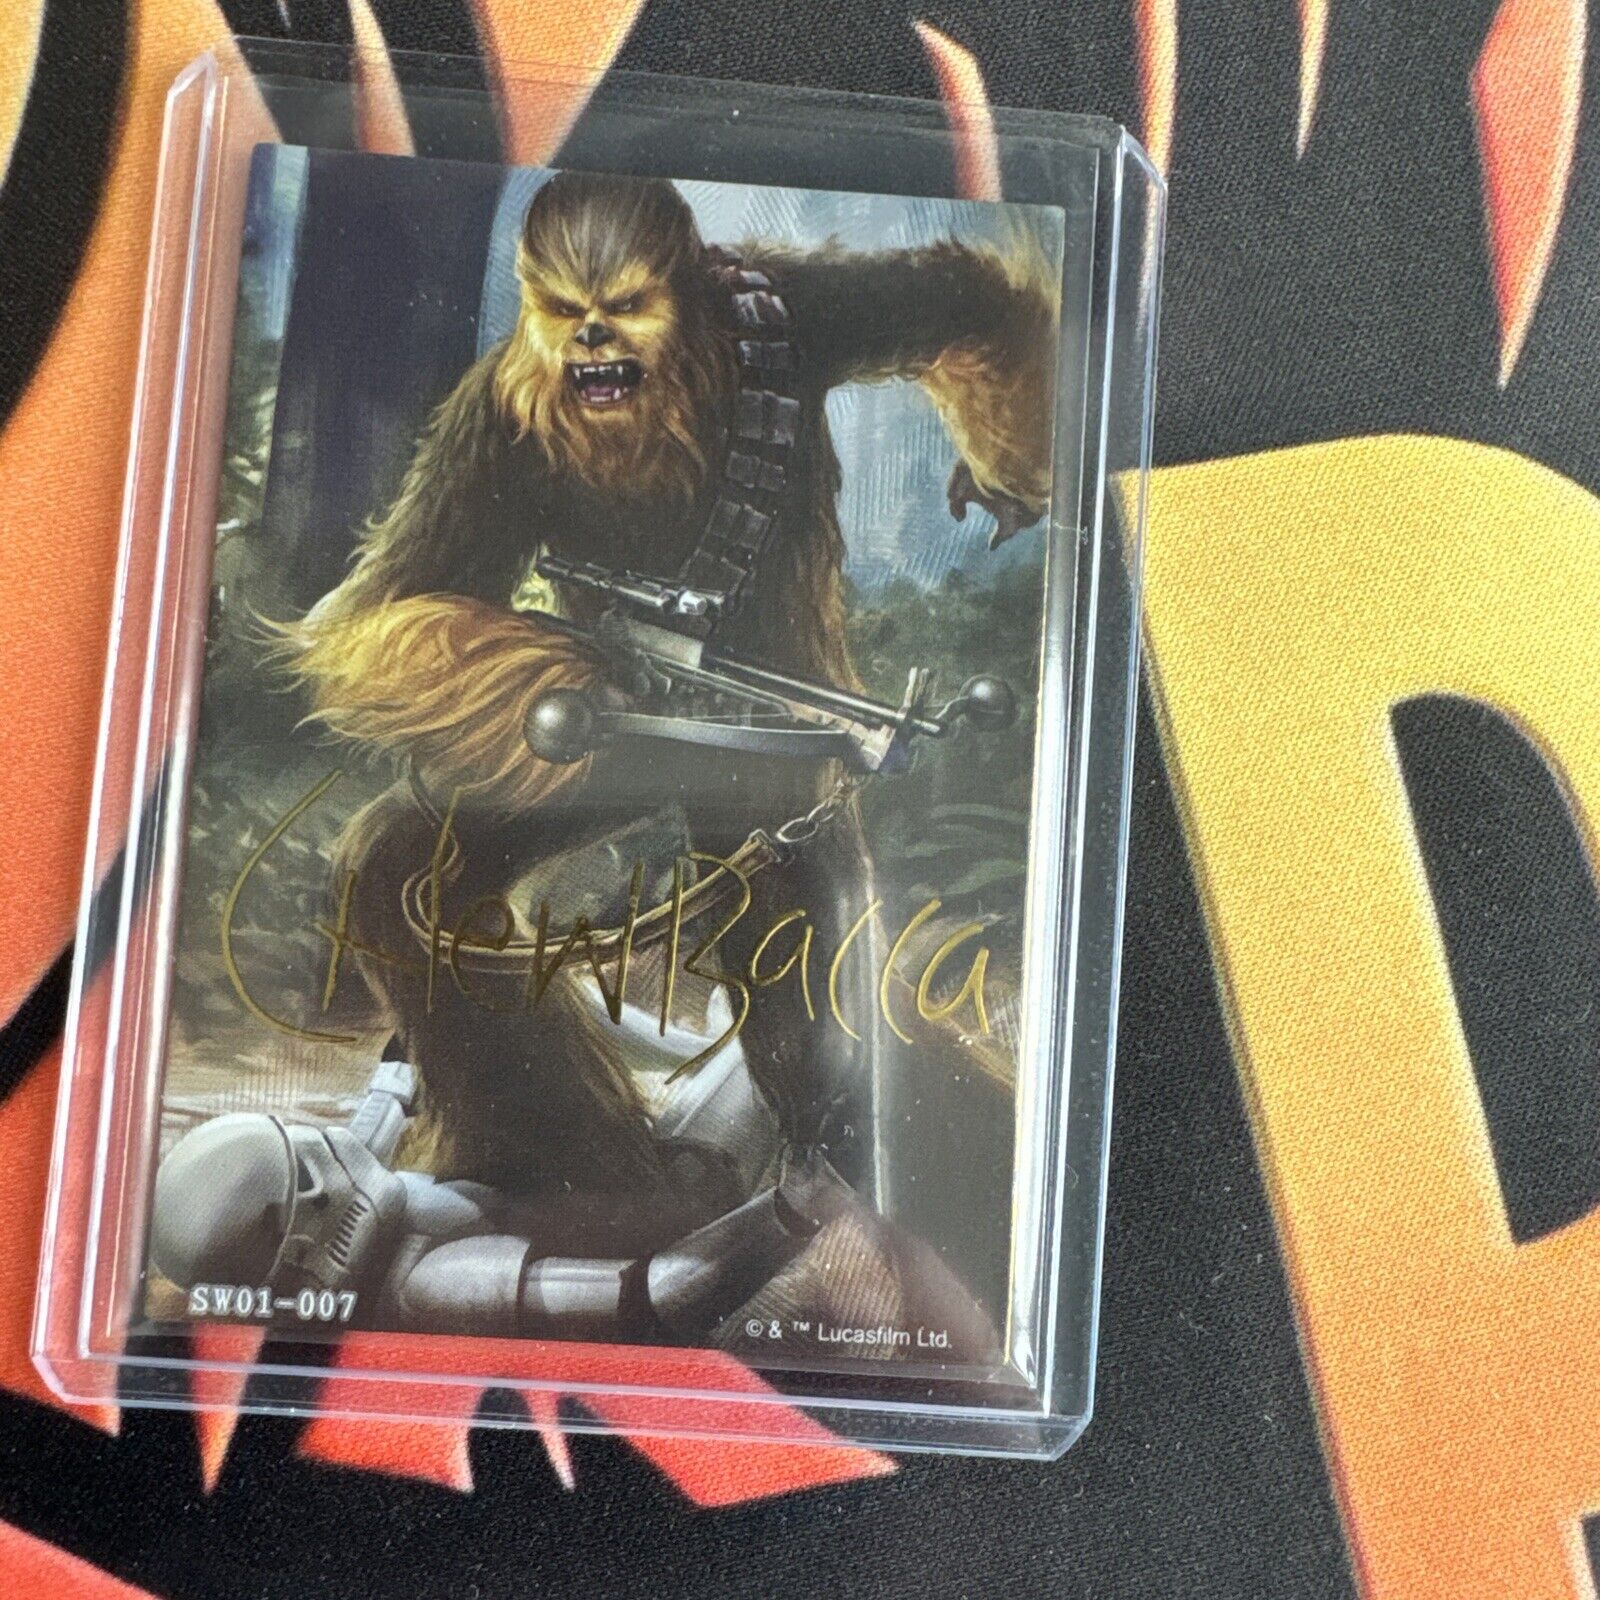 2023 Star Wars Global Art Series Chewbacca Gold Limited /100 #SW01-007